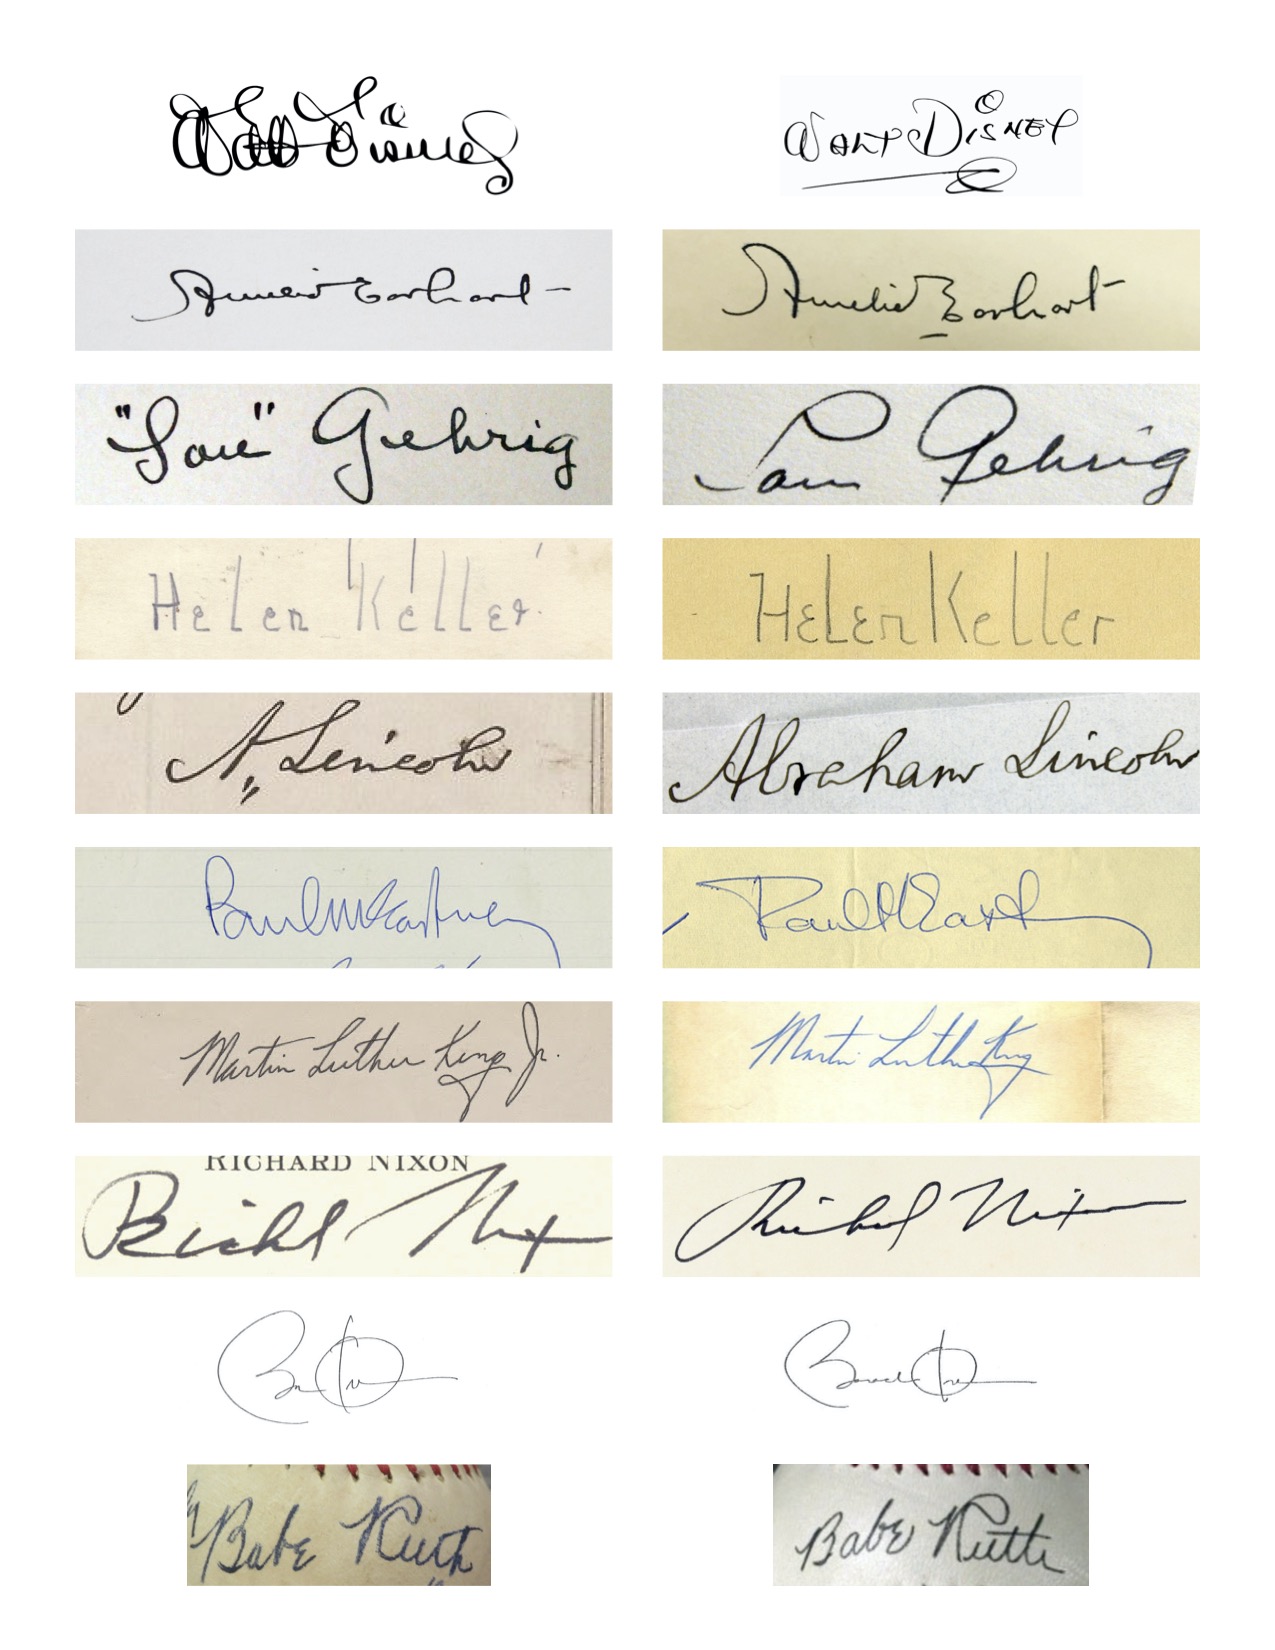 The signatures that appear
most different, at a glance, are probably Walt Disney, Lou Gehrig, and Paul McCartney. If you look closer, the ones
that appear to have concerning differences in terms of specific details are Amelia Earhart, Helen Keller,
and maybe Richard Nixon. For example, the 'r' in the left-side 'Keller' is entirely different than the 'r' in
the right-side 'Keller'.